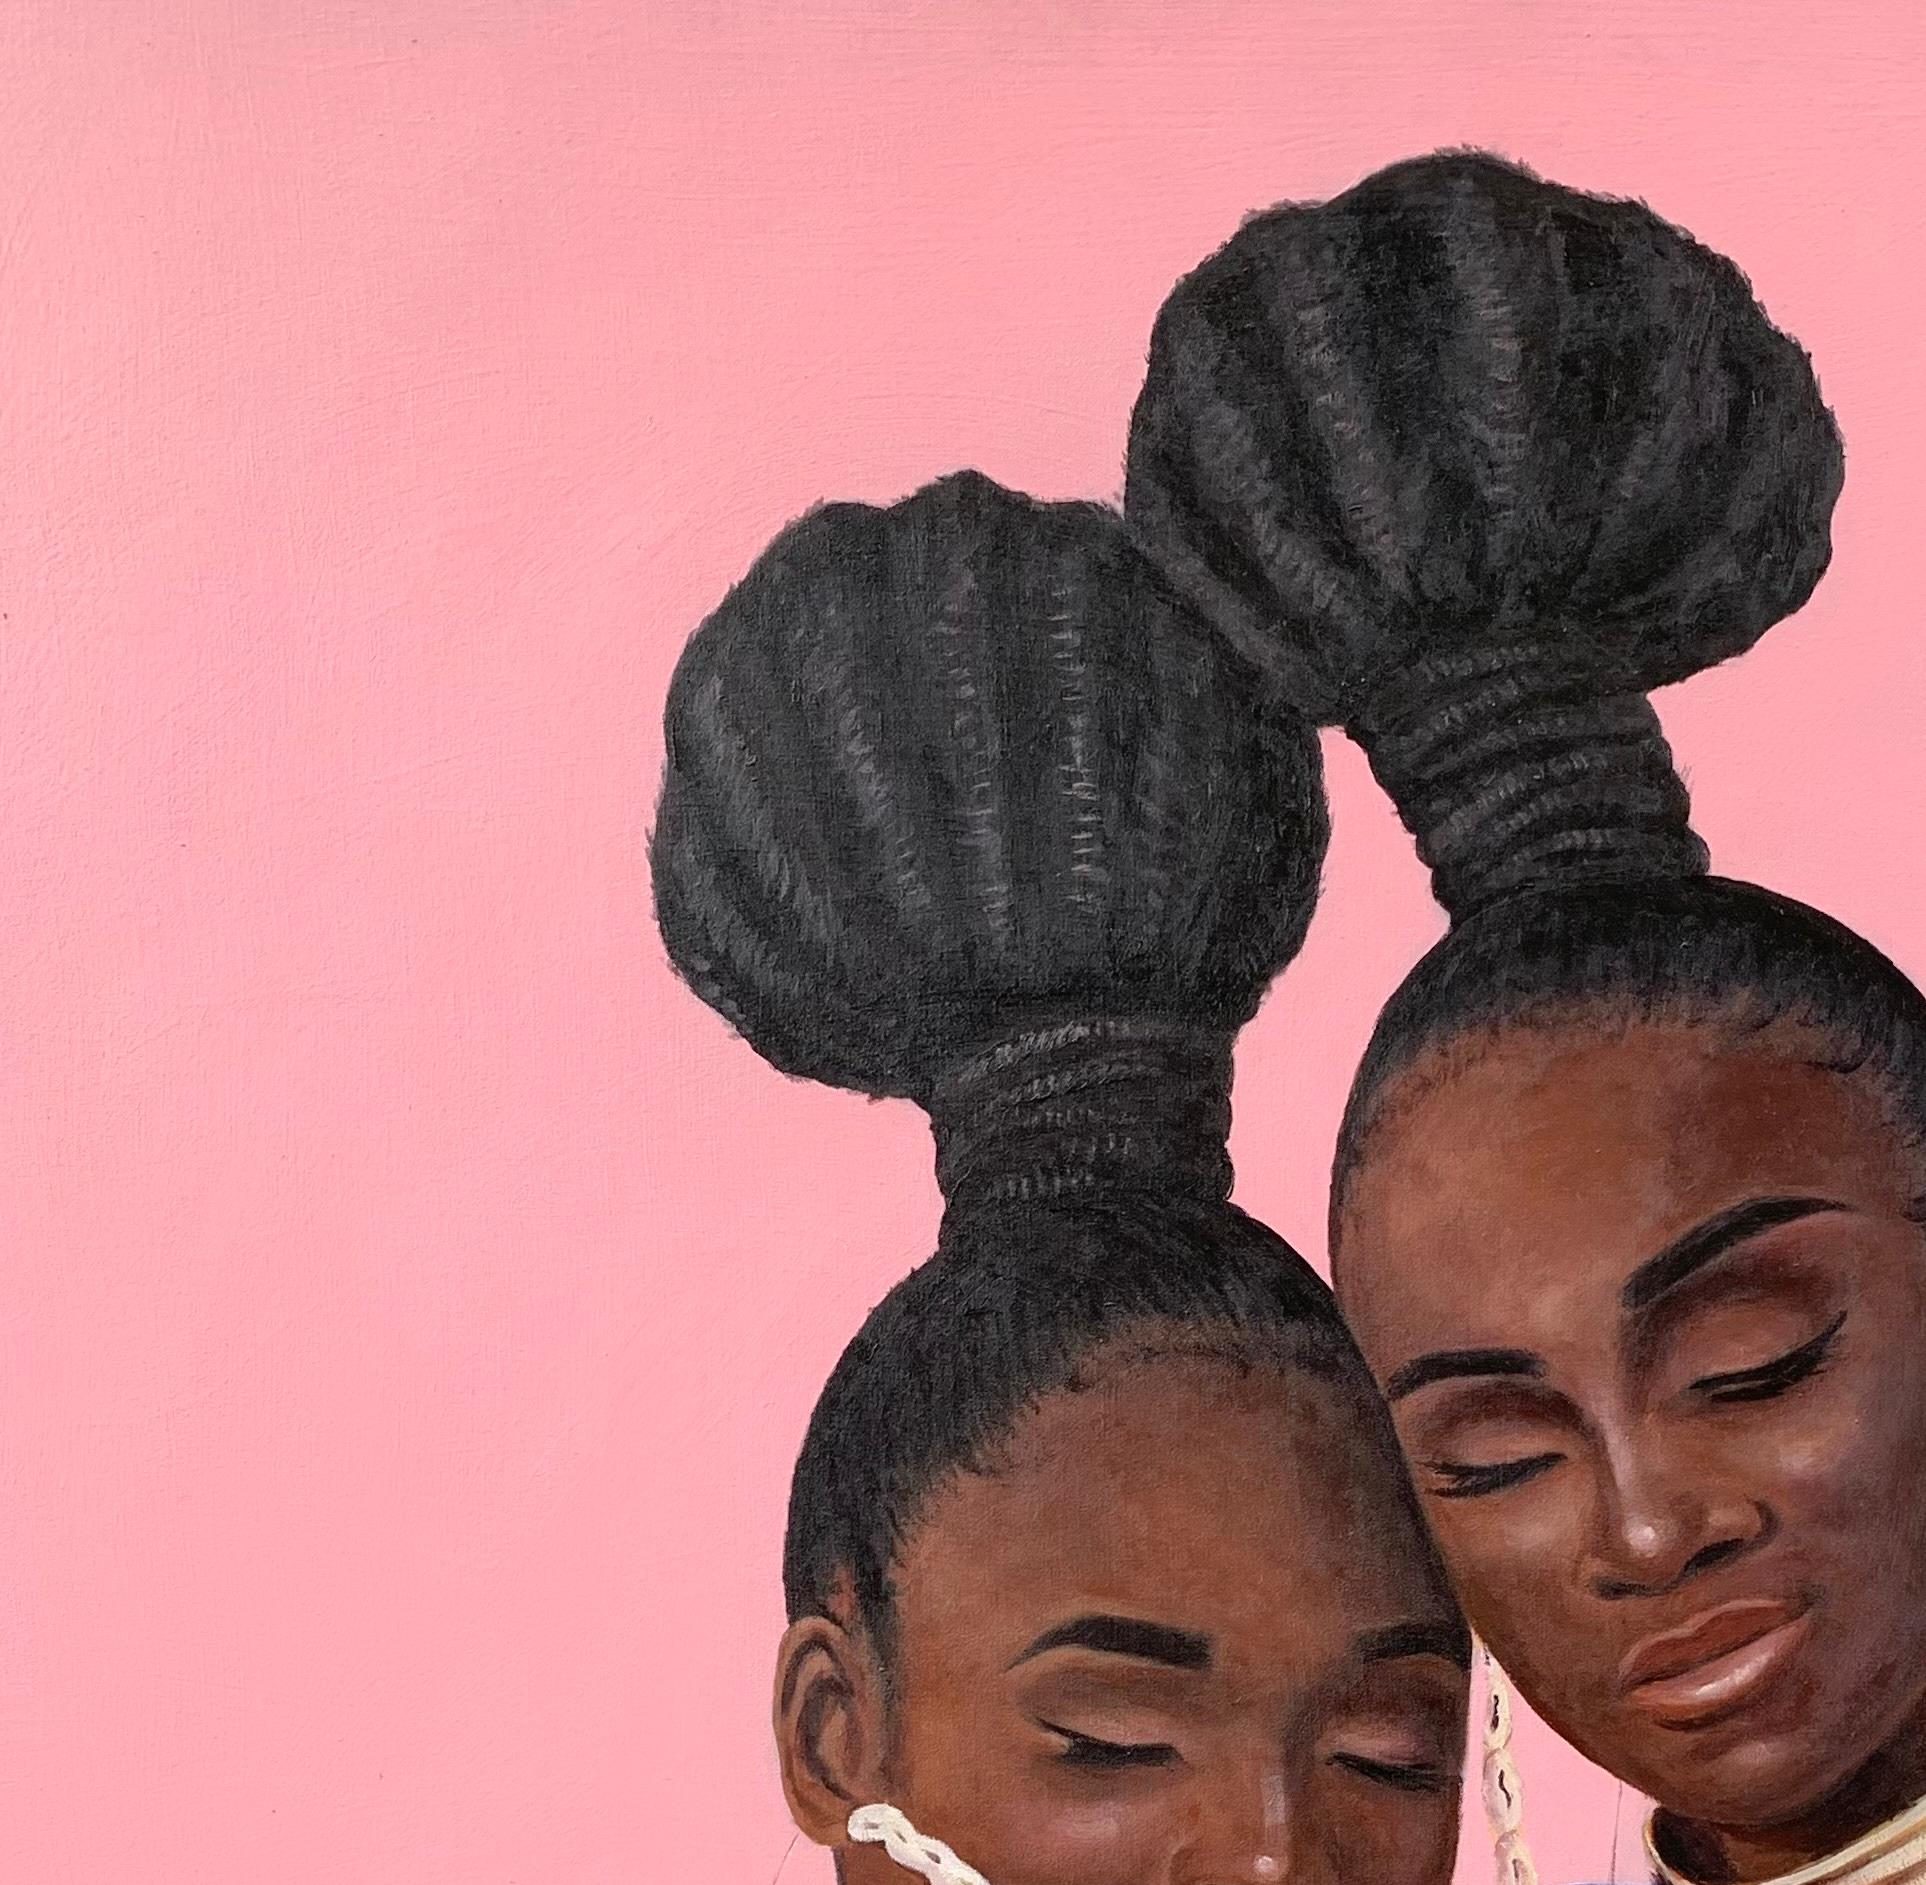 My Sister and Friend 1 - Painting by Esther Obiwuru